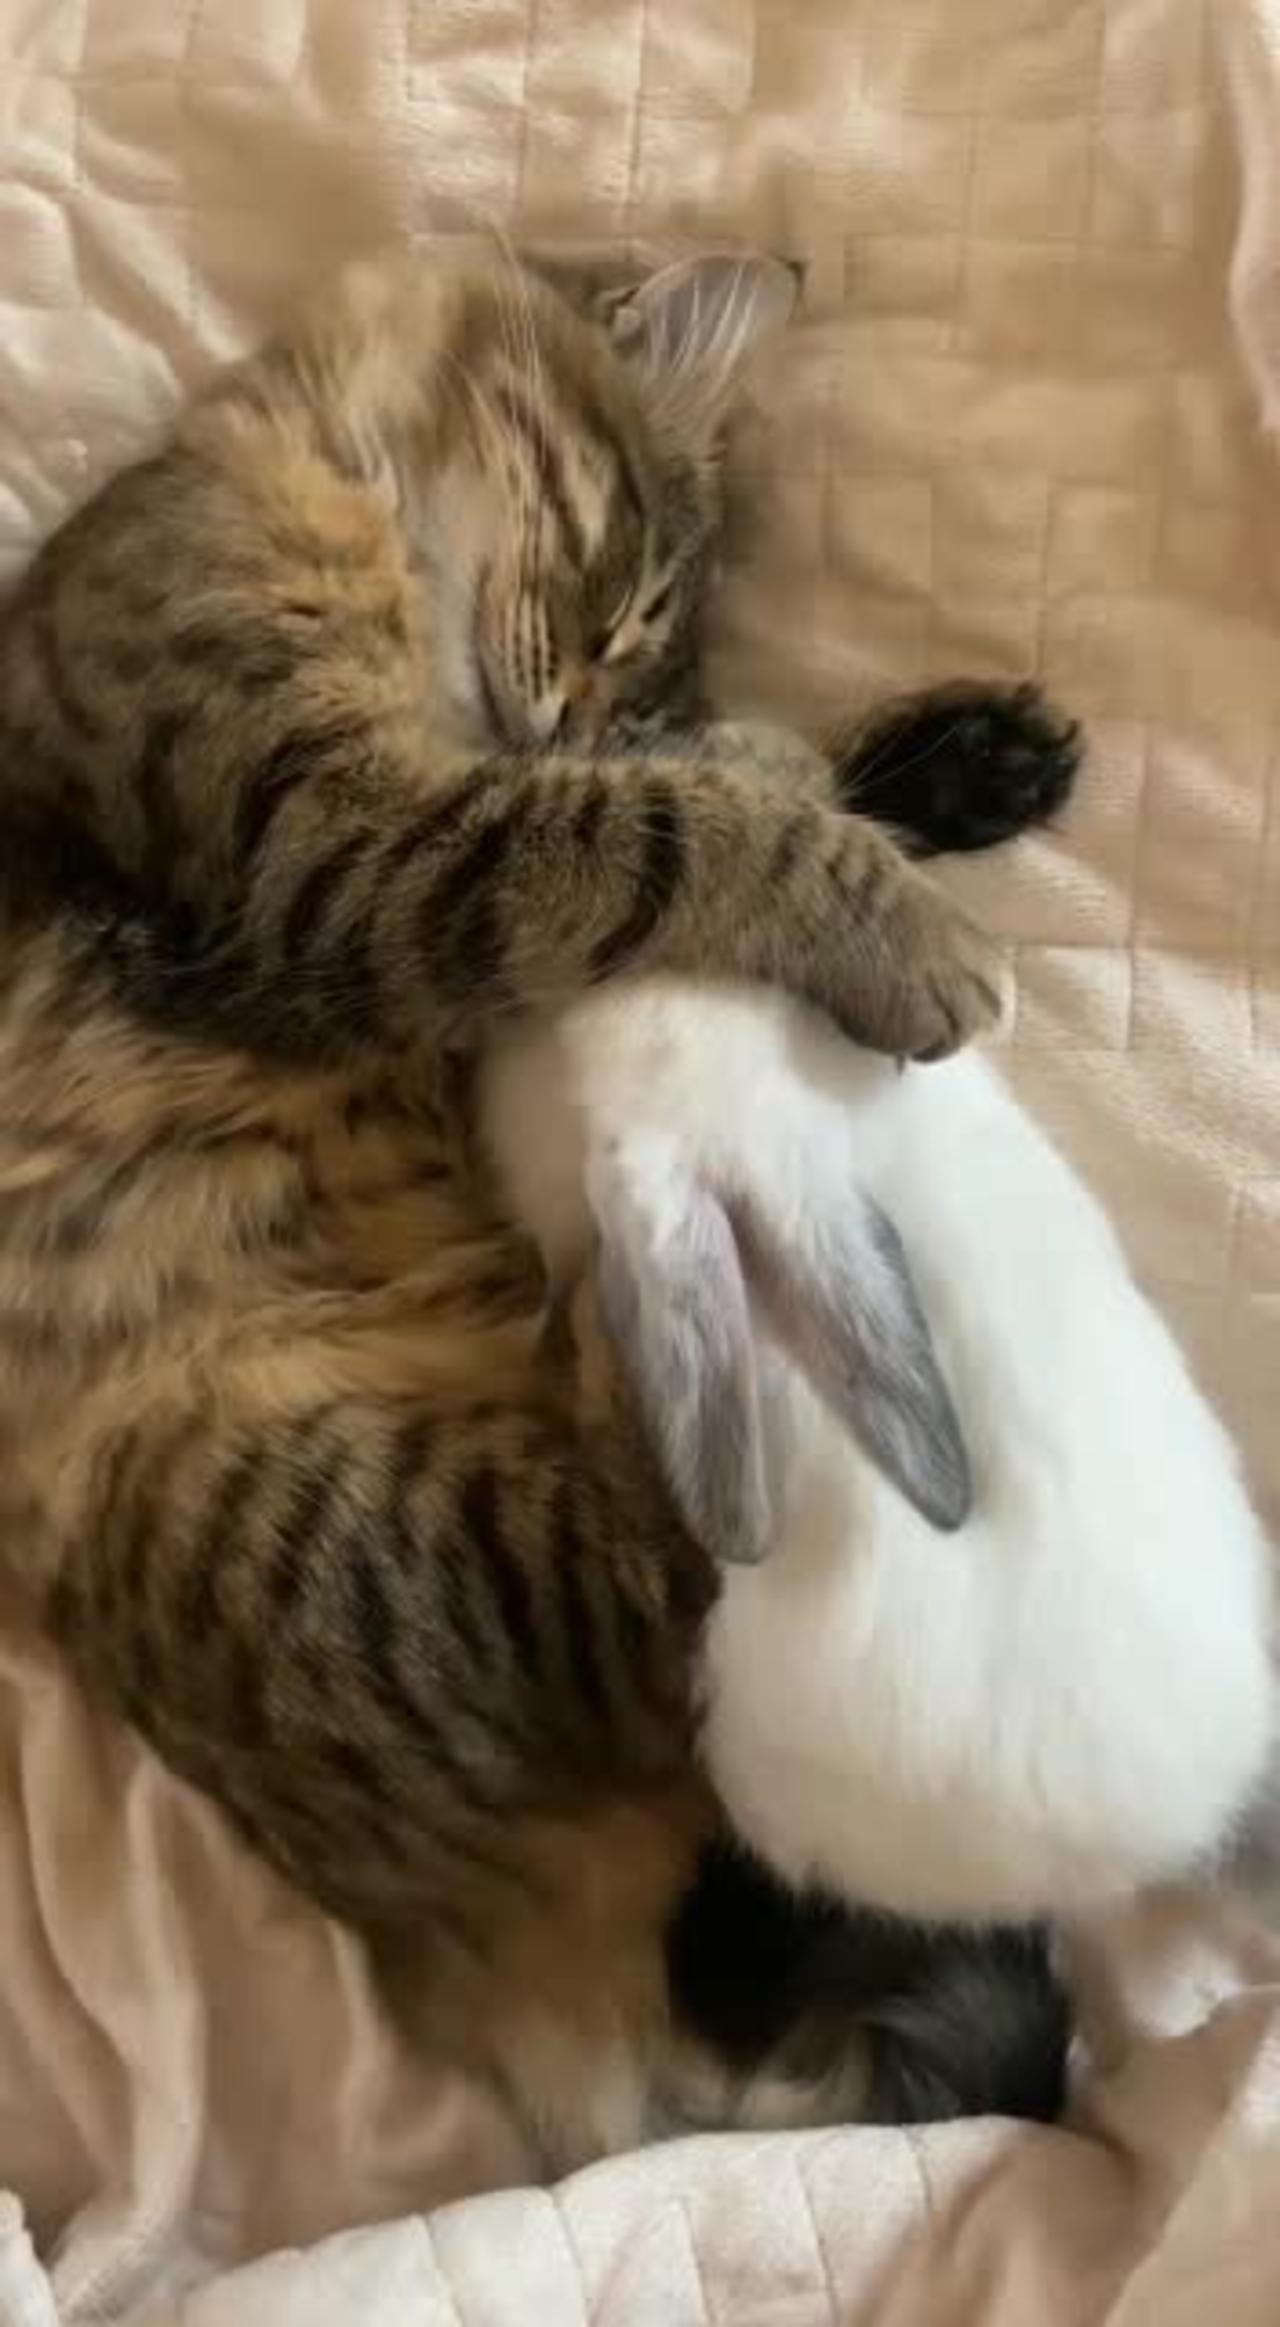 Funny Cat And Rabbit is sleeping in blanket